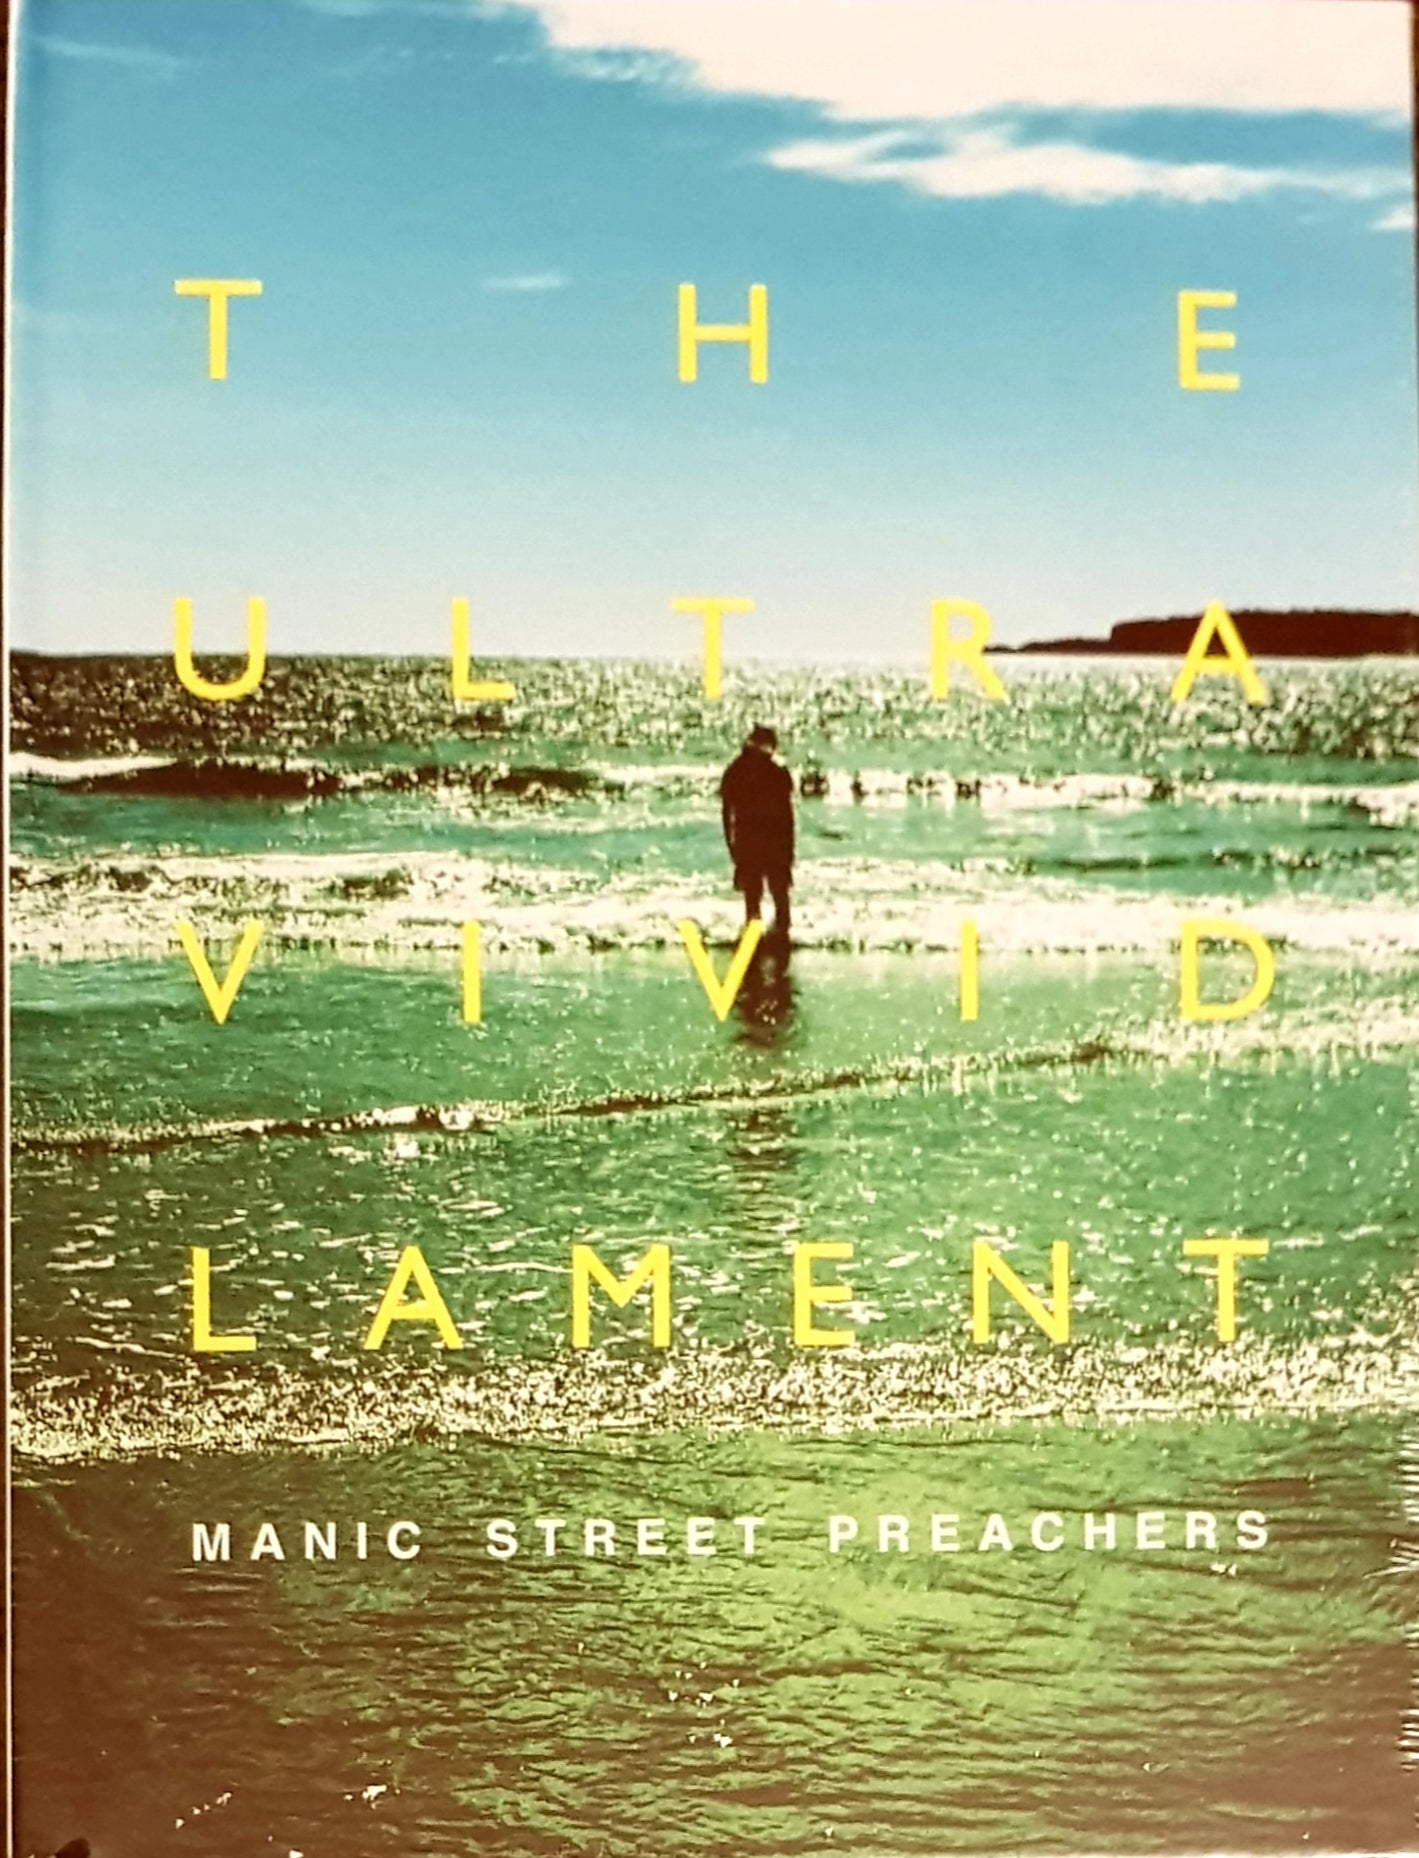 SIGNED Manic Street Preachers: The Ultra Vivid Lament - 2xCD Deluxe